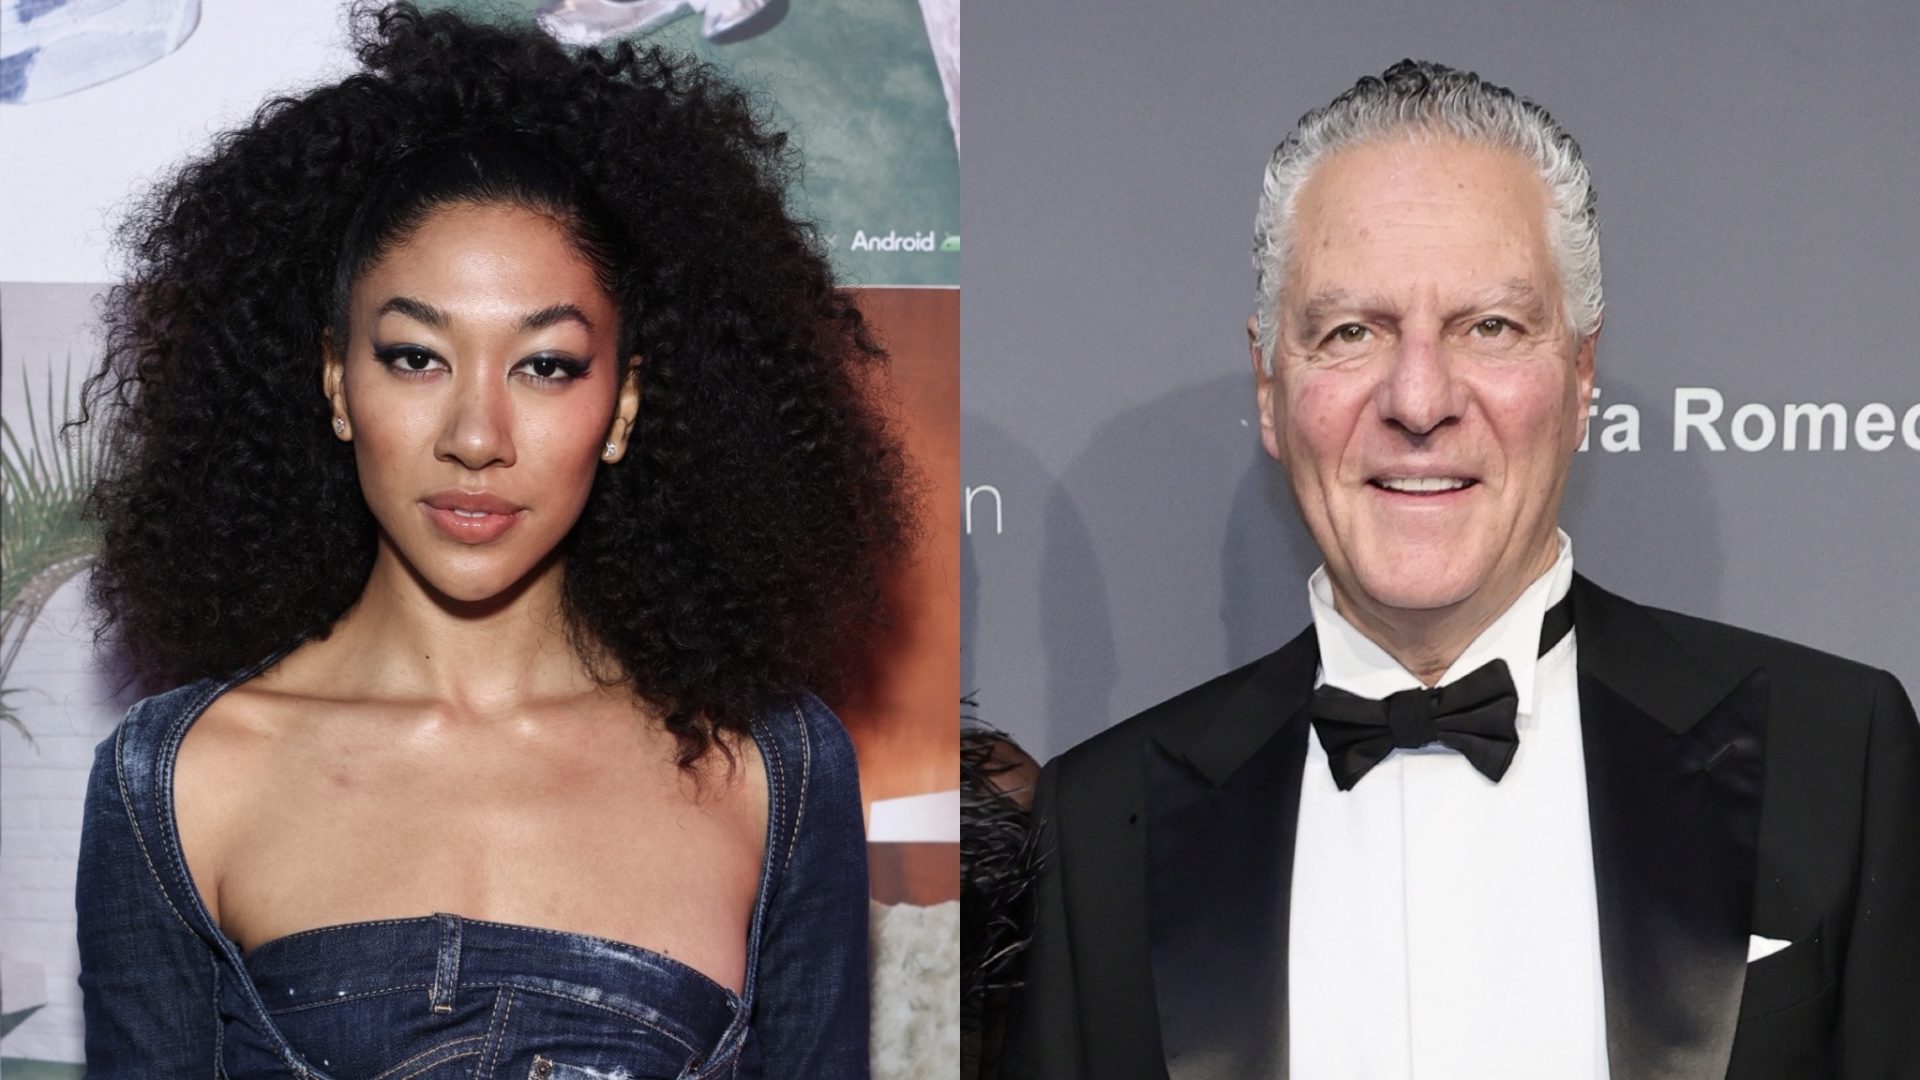 Bae Watch? Aoki Lee Simmons Seemingly Reacts After She's Spotted Kissing 65-Year-Old Businessman Vittorio Assaf